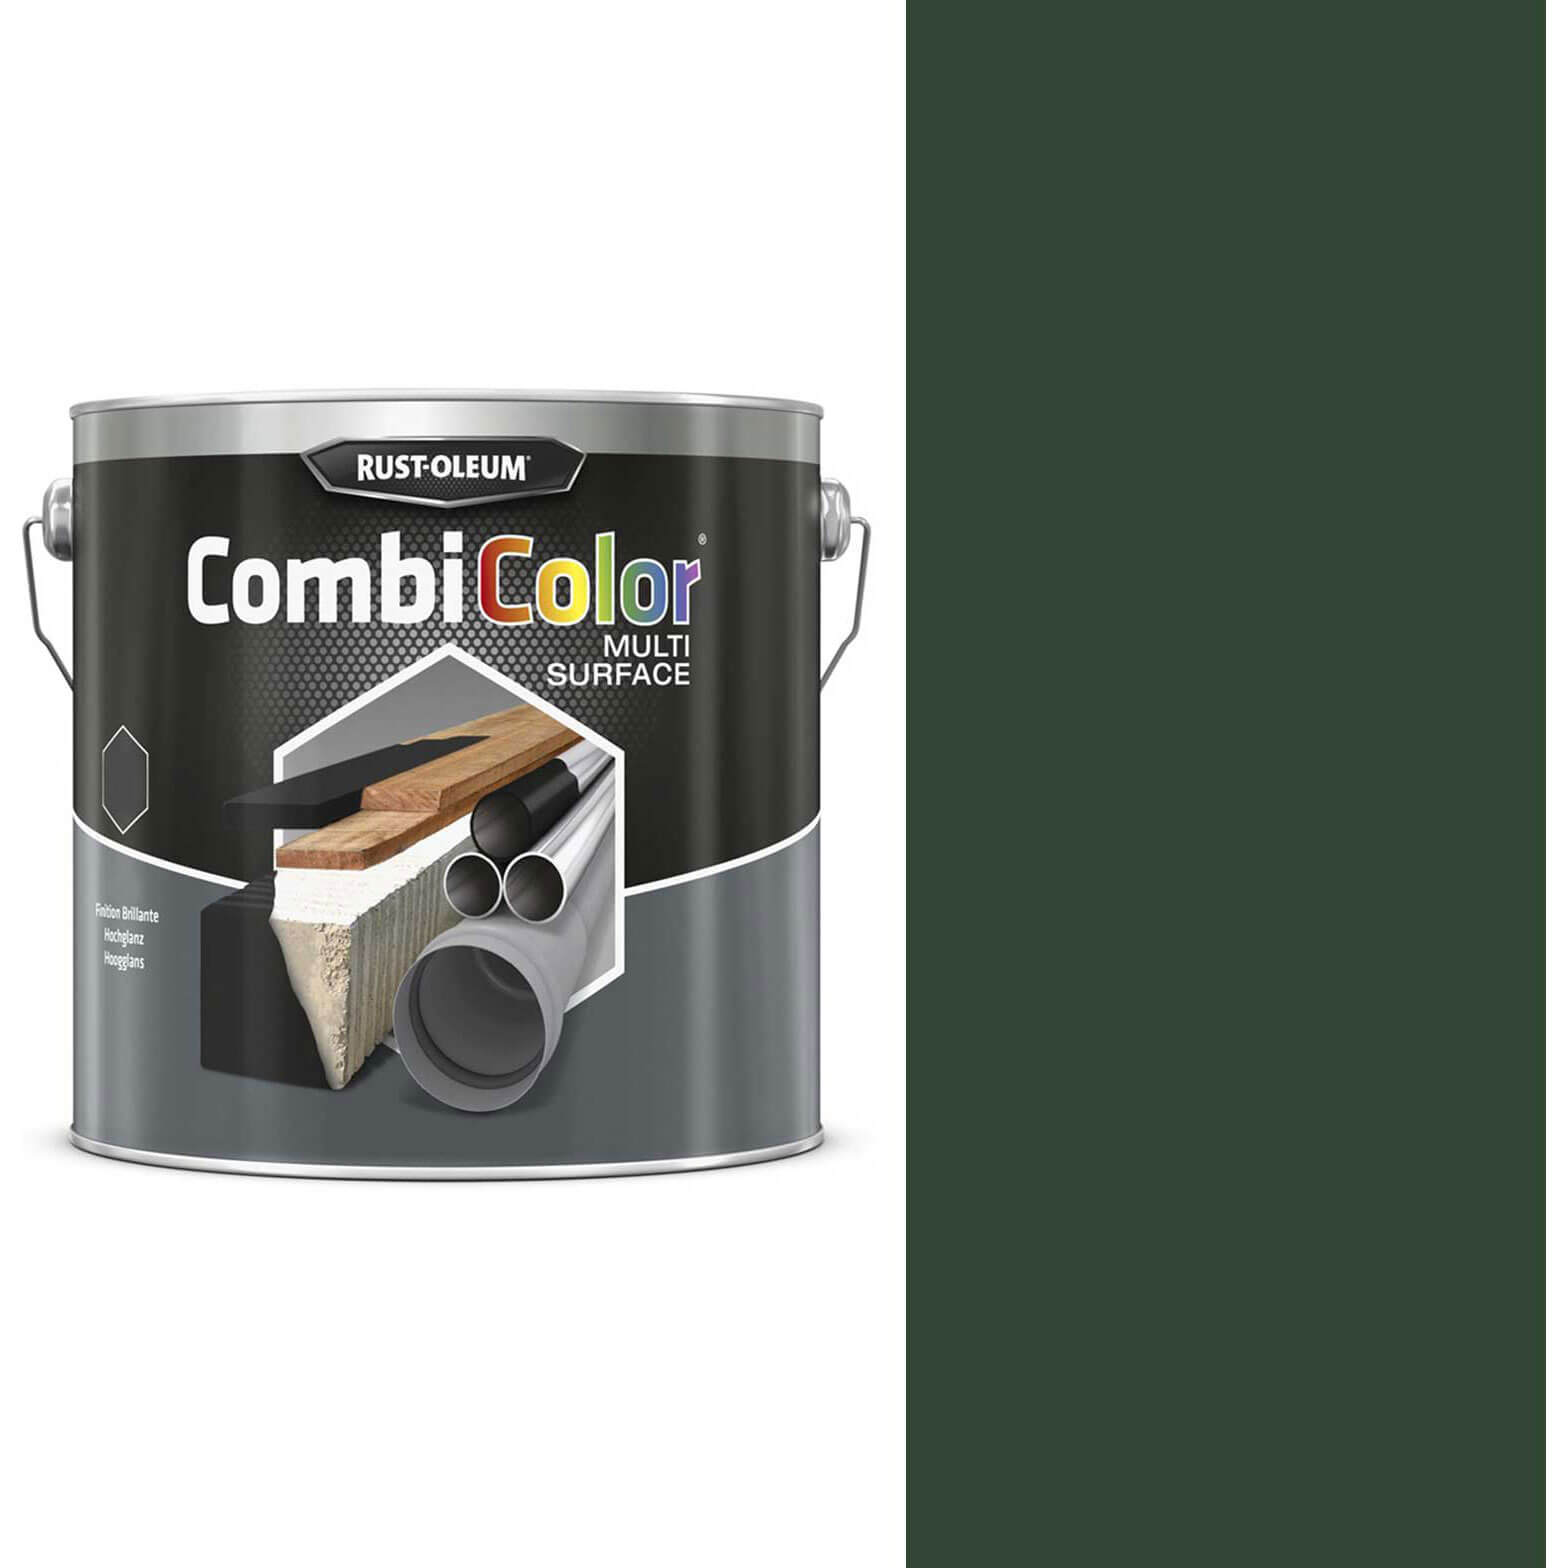 Image of Rust Oleum CombiColor Multi Surface Paint Moss Green 2.5l